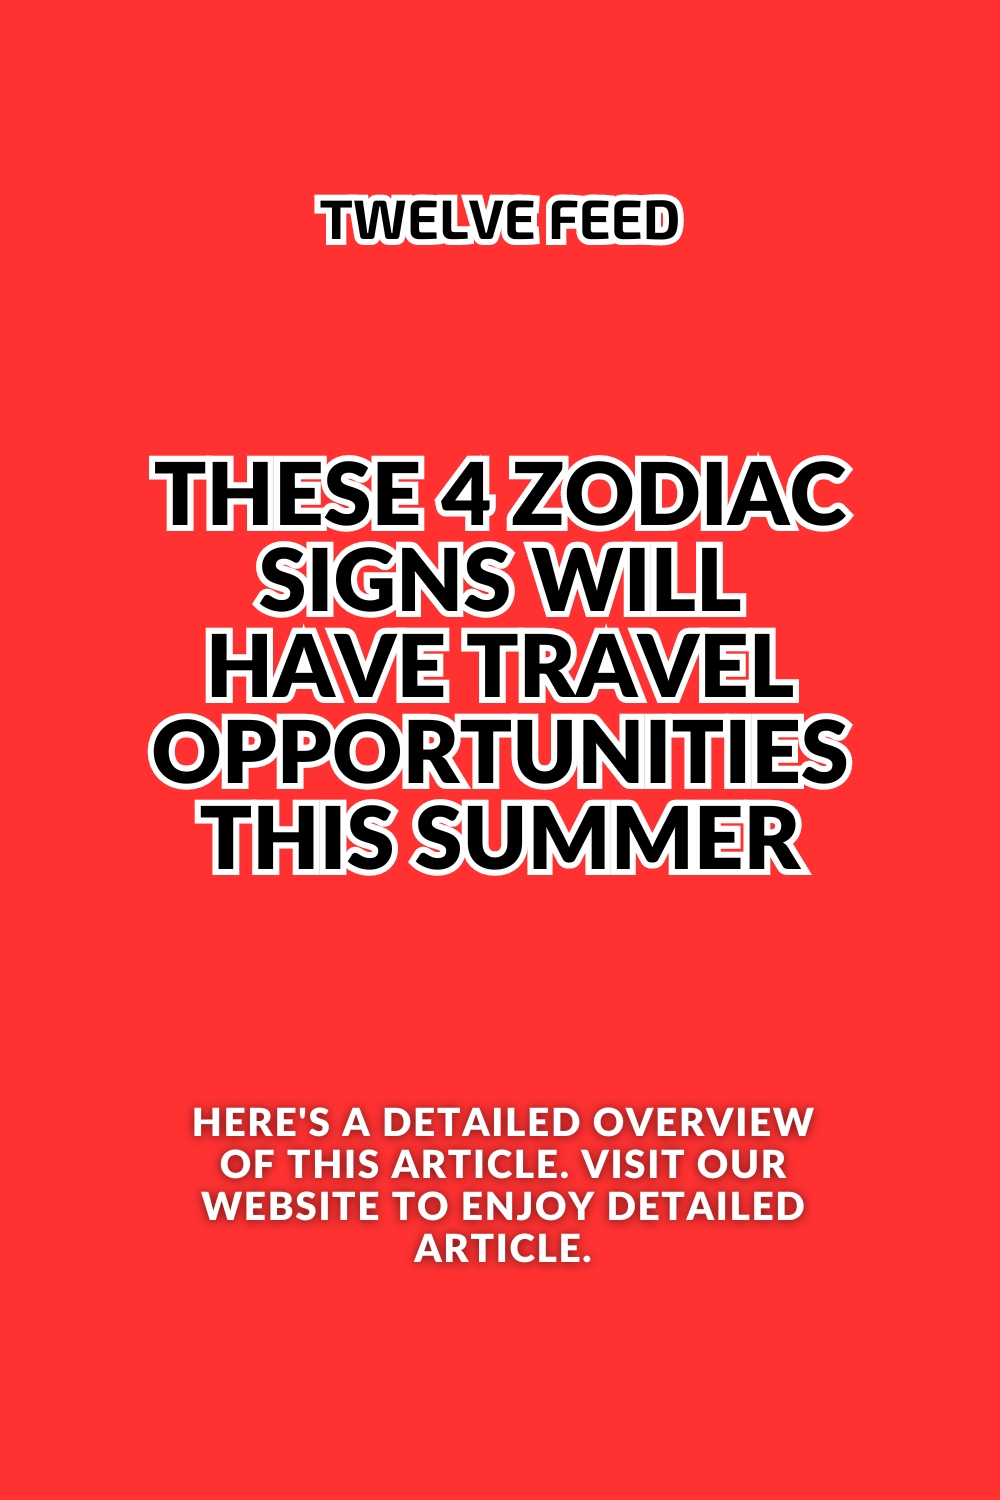 4 Zodiac Signs Will Have Travel Opportunities This Summer